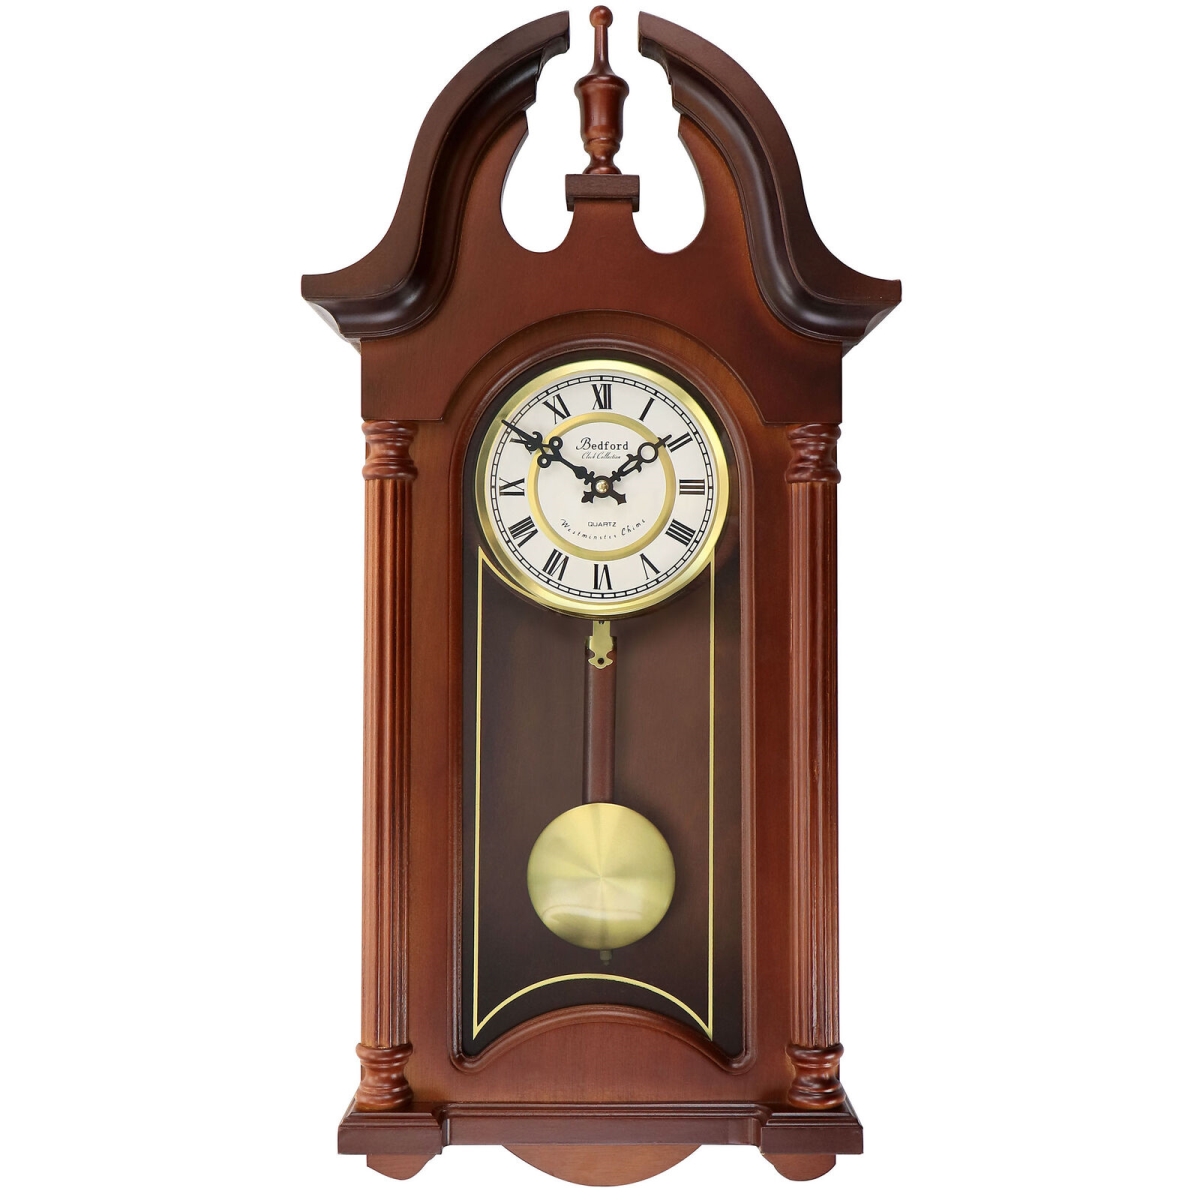 Picture of Bedford Clock Collection BED-DELPHINE 27 in. Delphine Chiming Pendulum Wall Clock, Mahogany